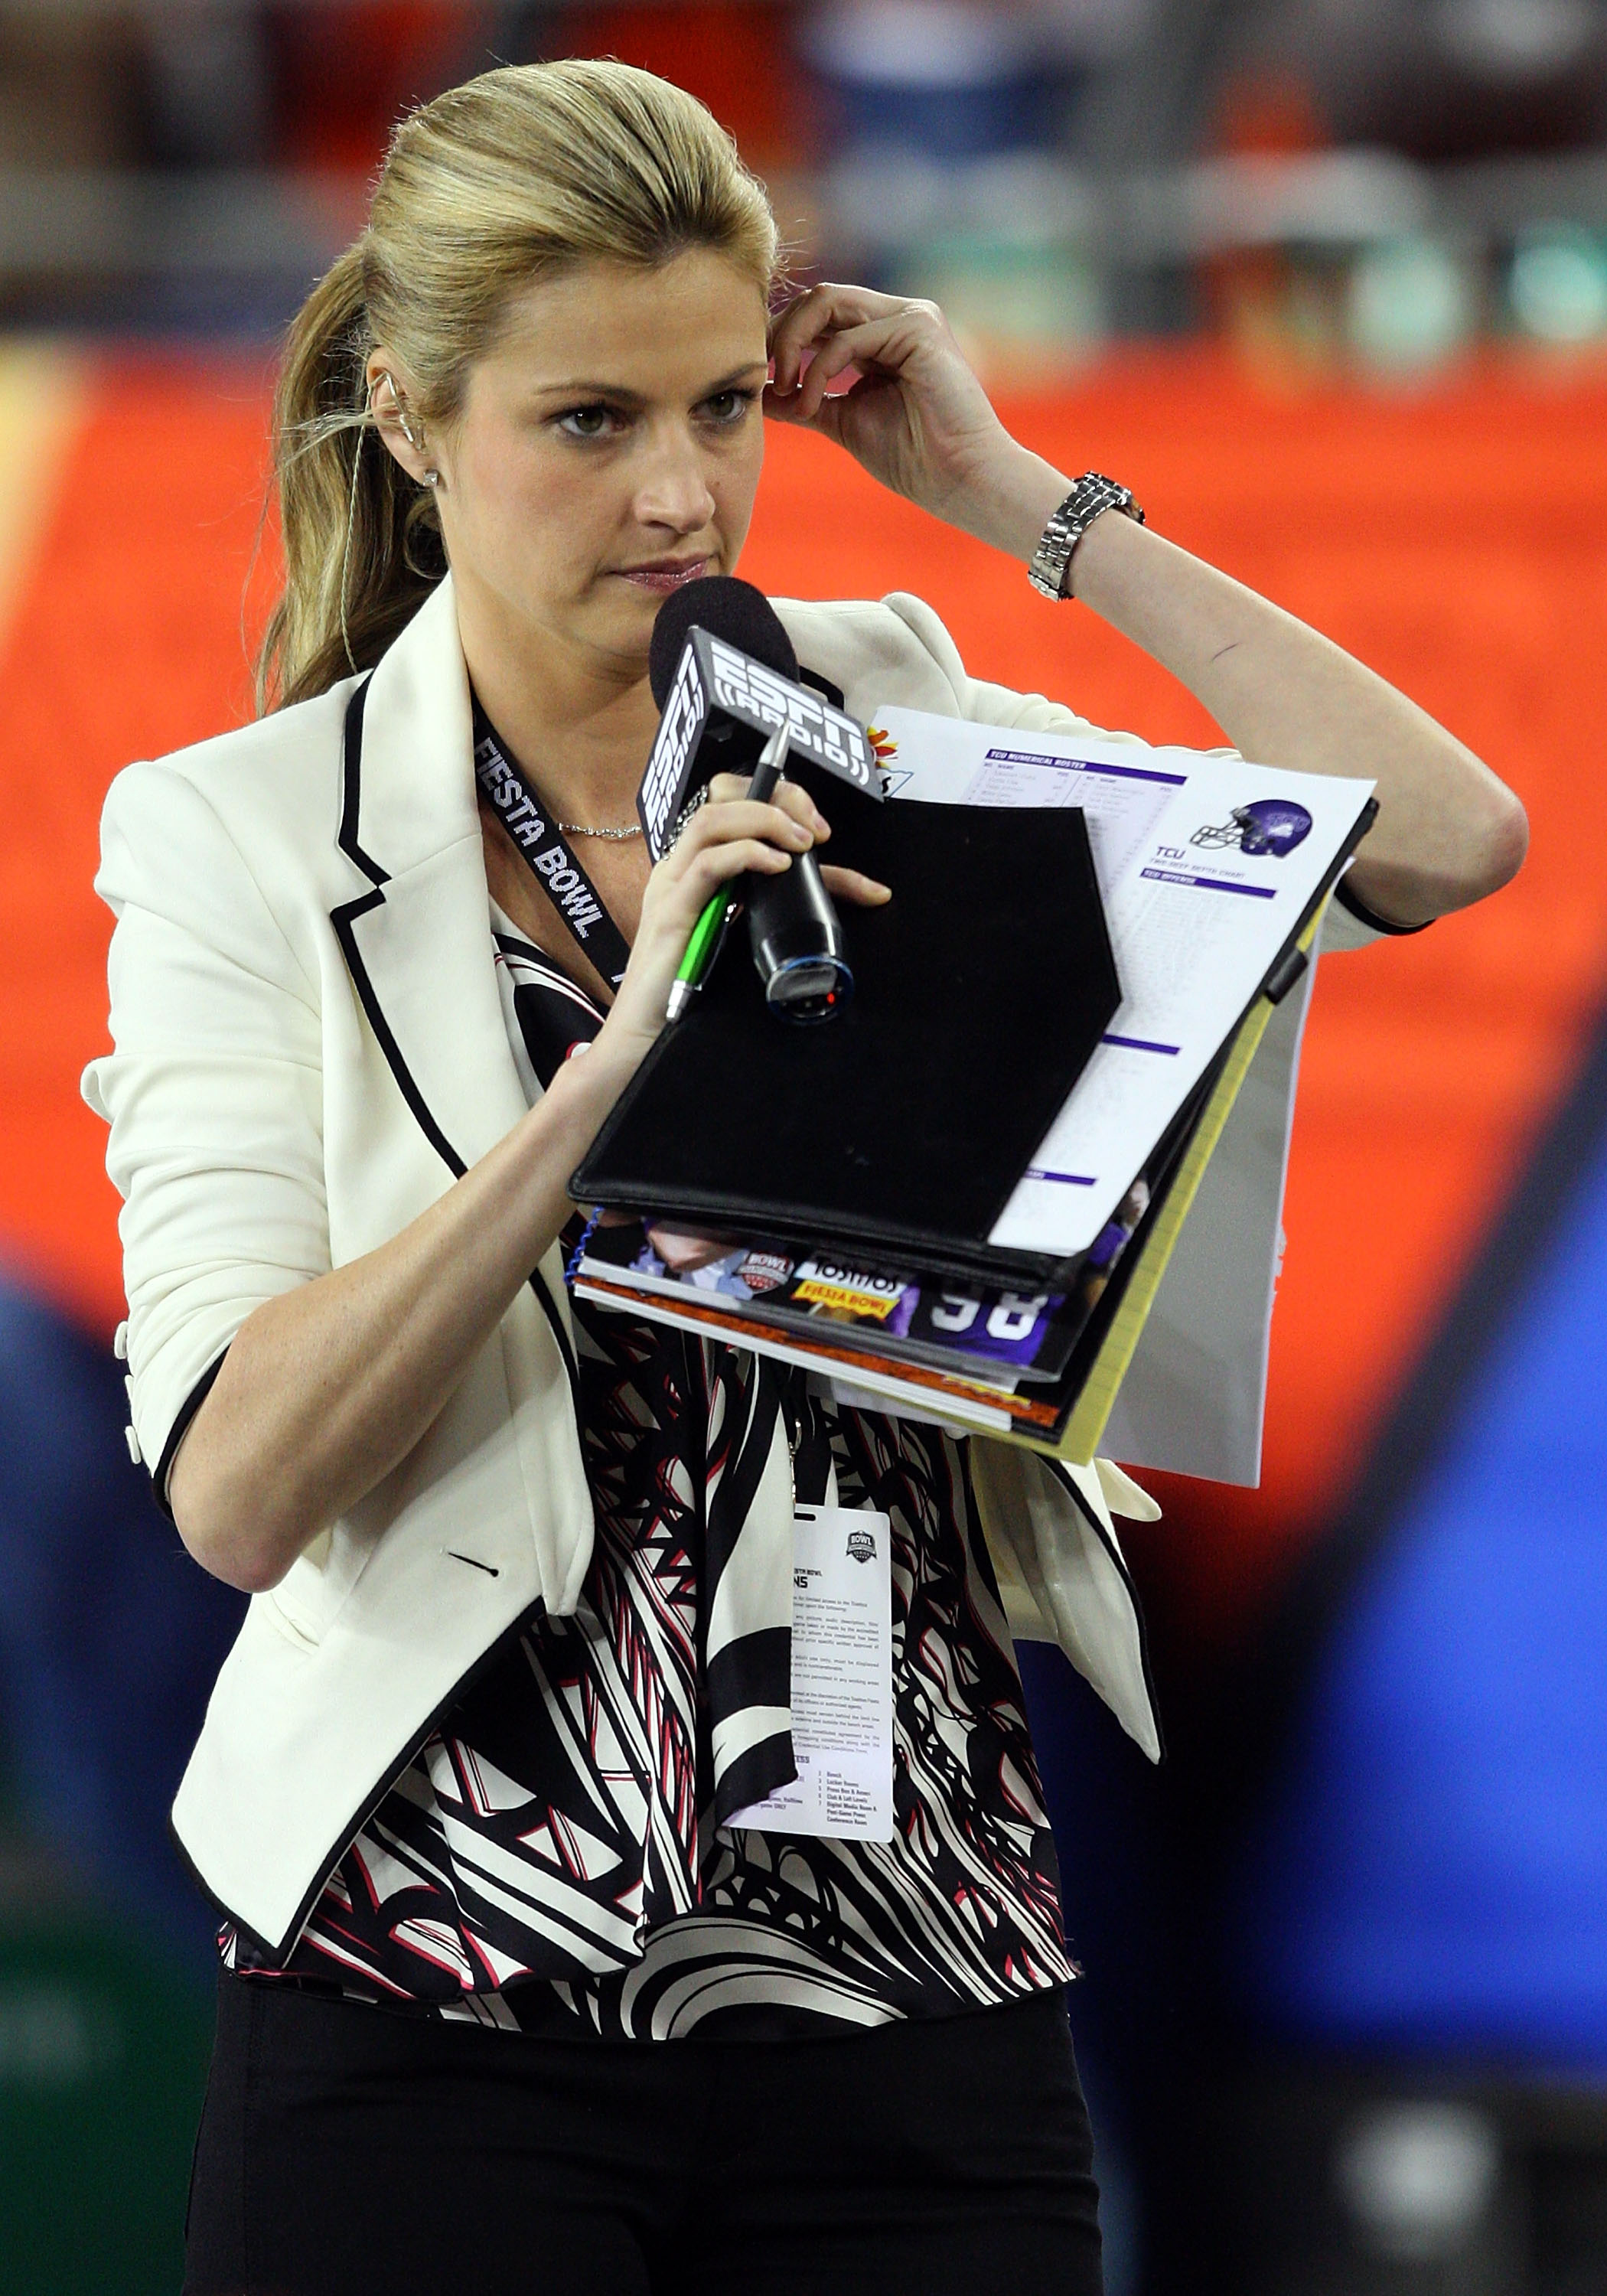 GLENDALE, AZ - JANUARY 04:  ESPN sideline reporter Erin Andrews walks down the sideline at the Tostitos Fiesta Bowl between the Boise State Broncos and the TCU Horned Frogs at the Universtity of Phoenix Stadium on January 4, 2010 in Glendale, Arizona.  (P